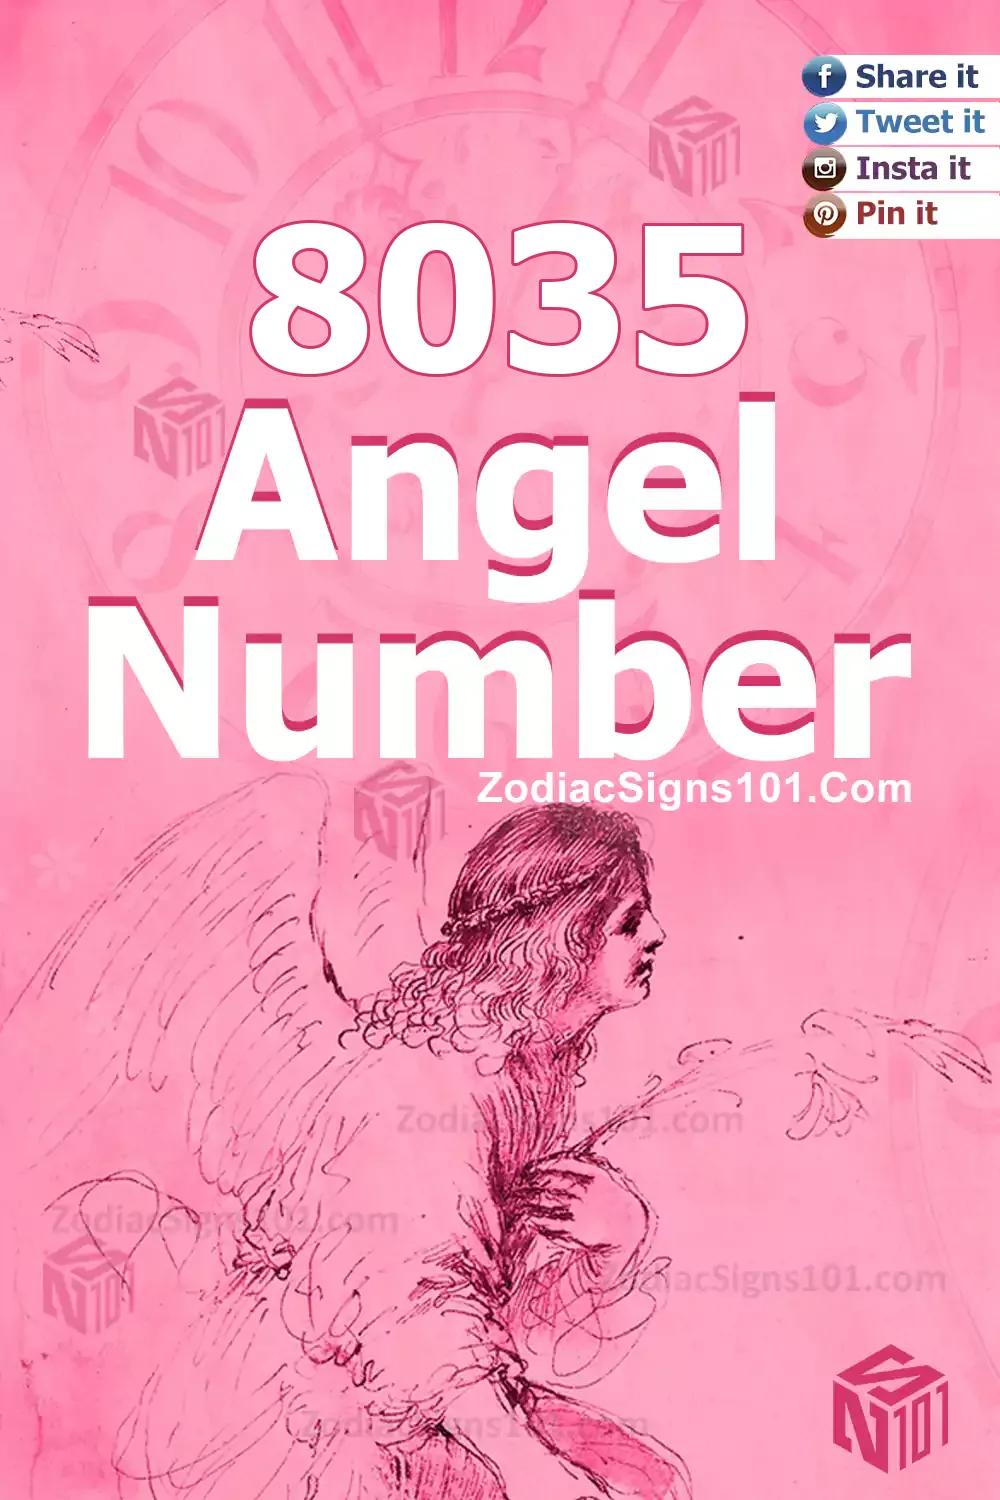 8035 Angel Number Meaning